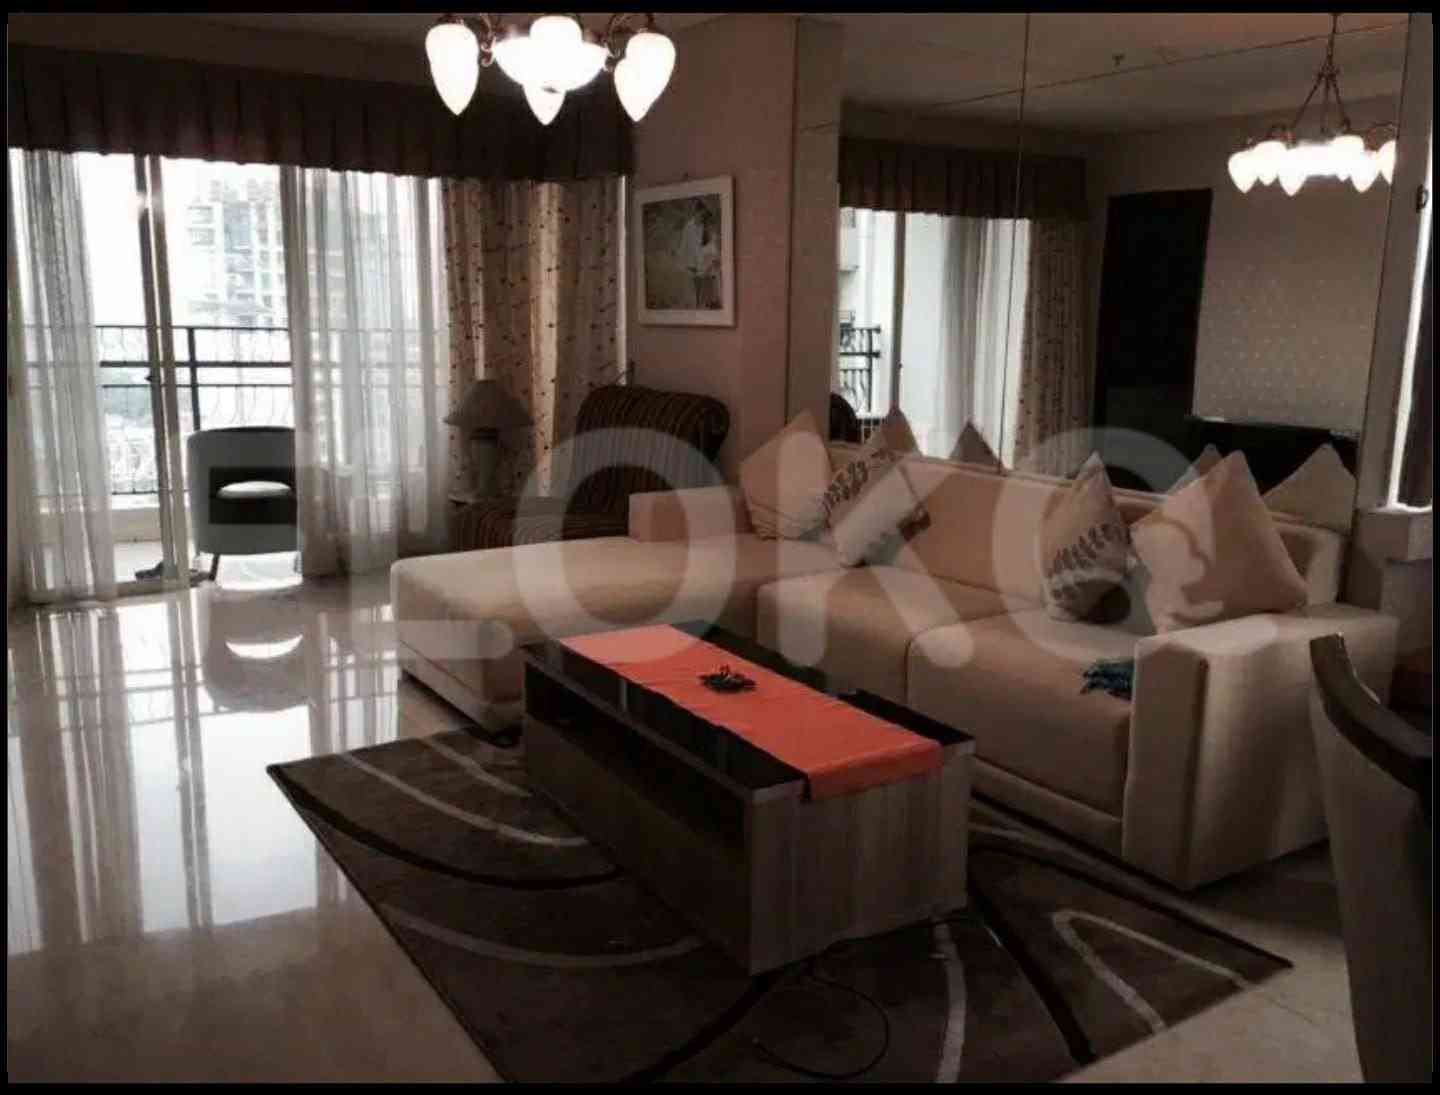 2 Bedroom on 17th Floor for Rent in Permata Hijau Residence - fpe3d7 1